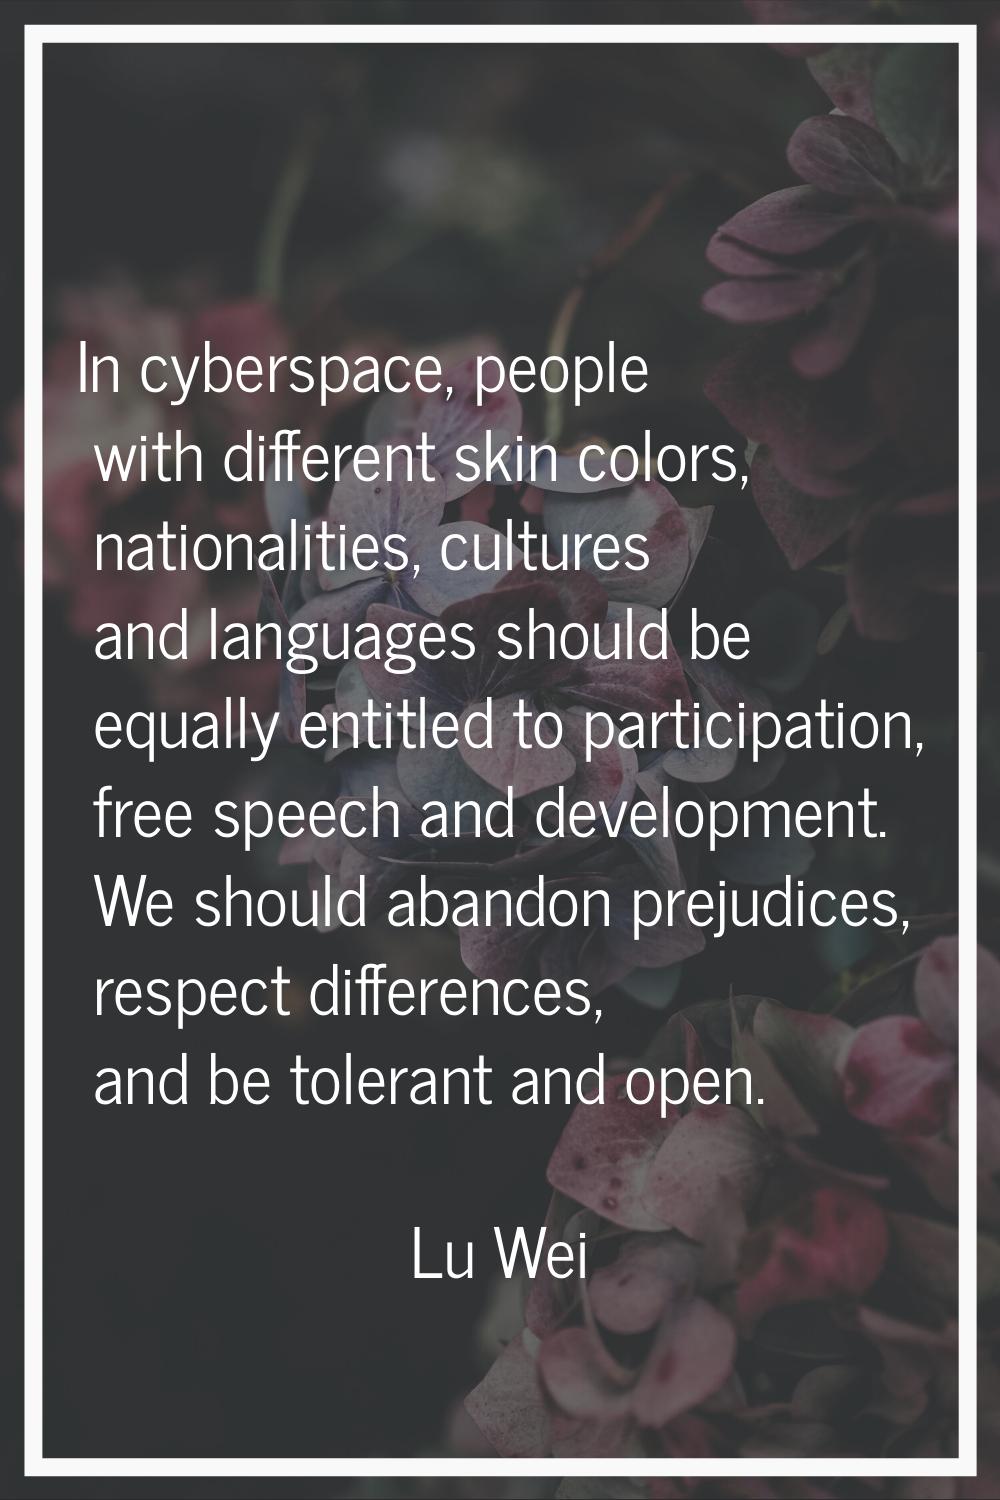 In cyberspace, people with different skin colors, nationalities, cultures and languages should be e